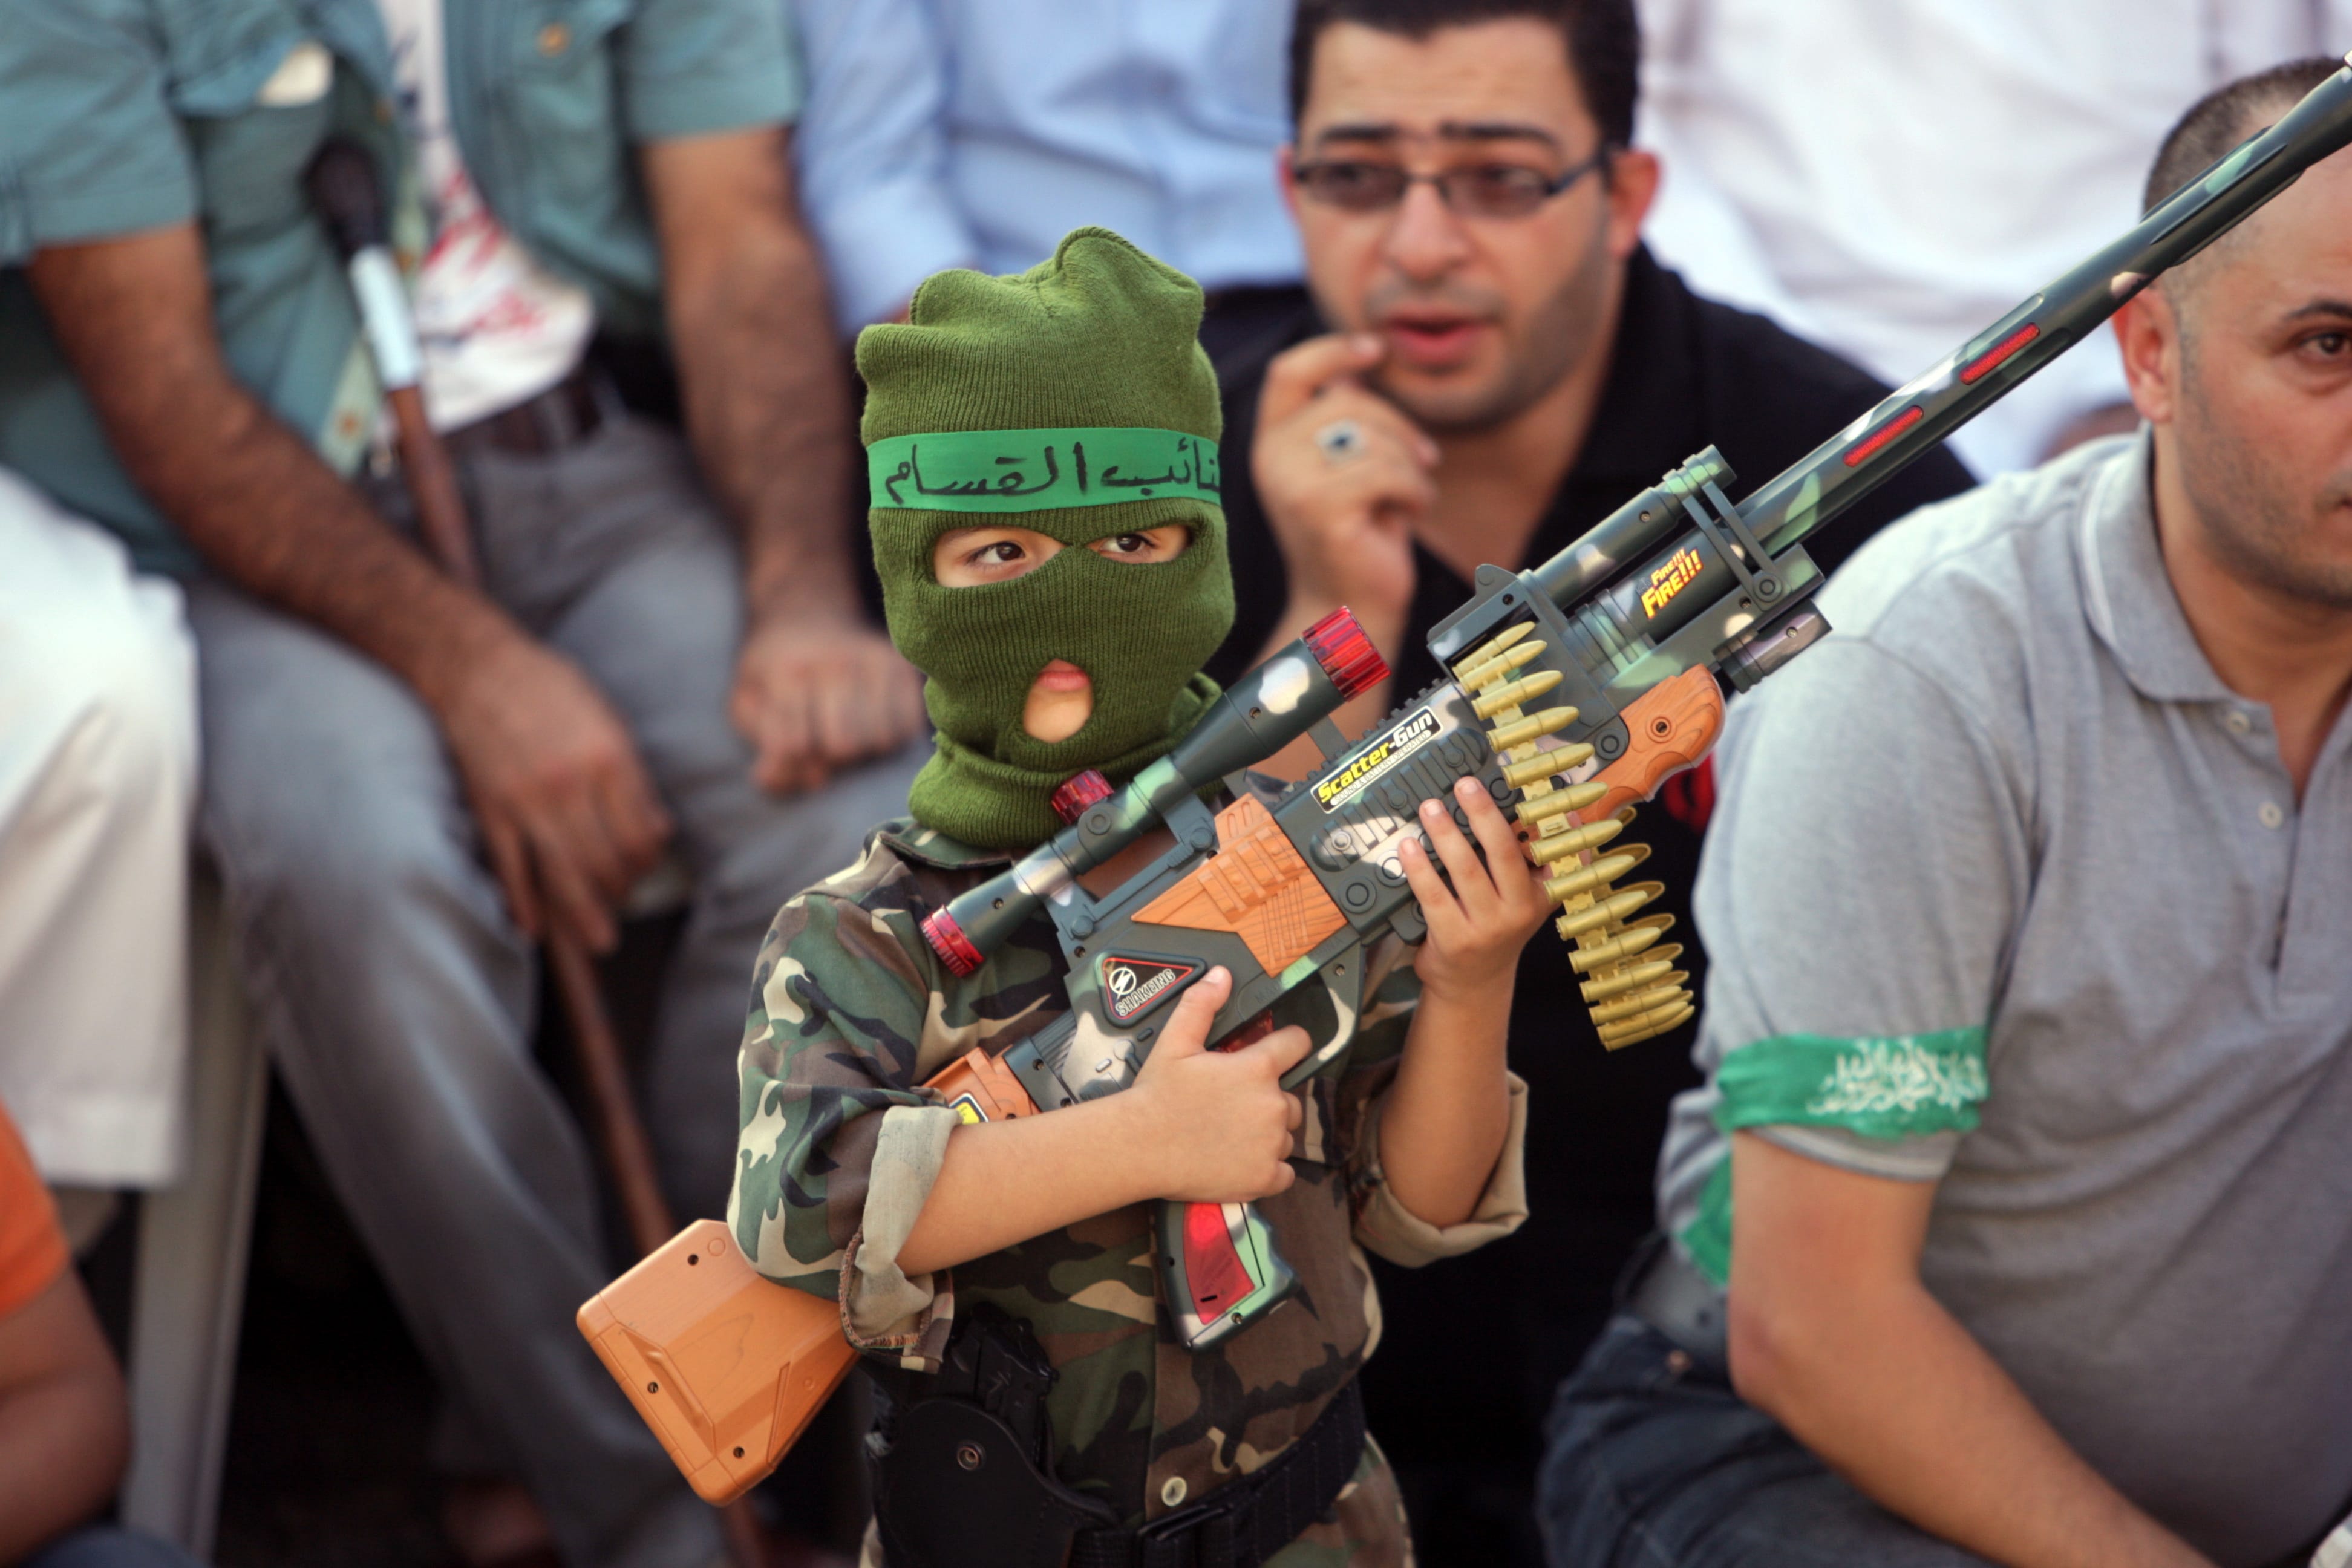 A Palestinian boy holds a toy gun during a celebration organized by Hamas in the West Bank city of Nablus, on Friday.